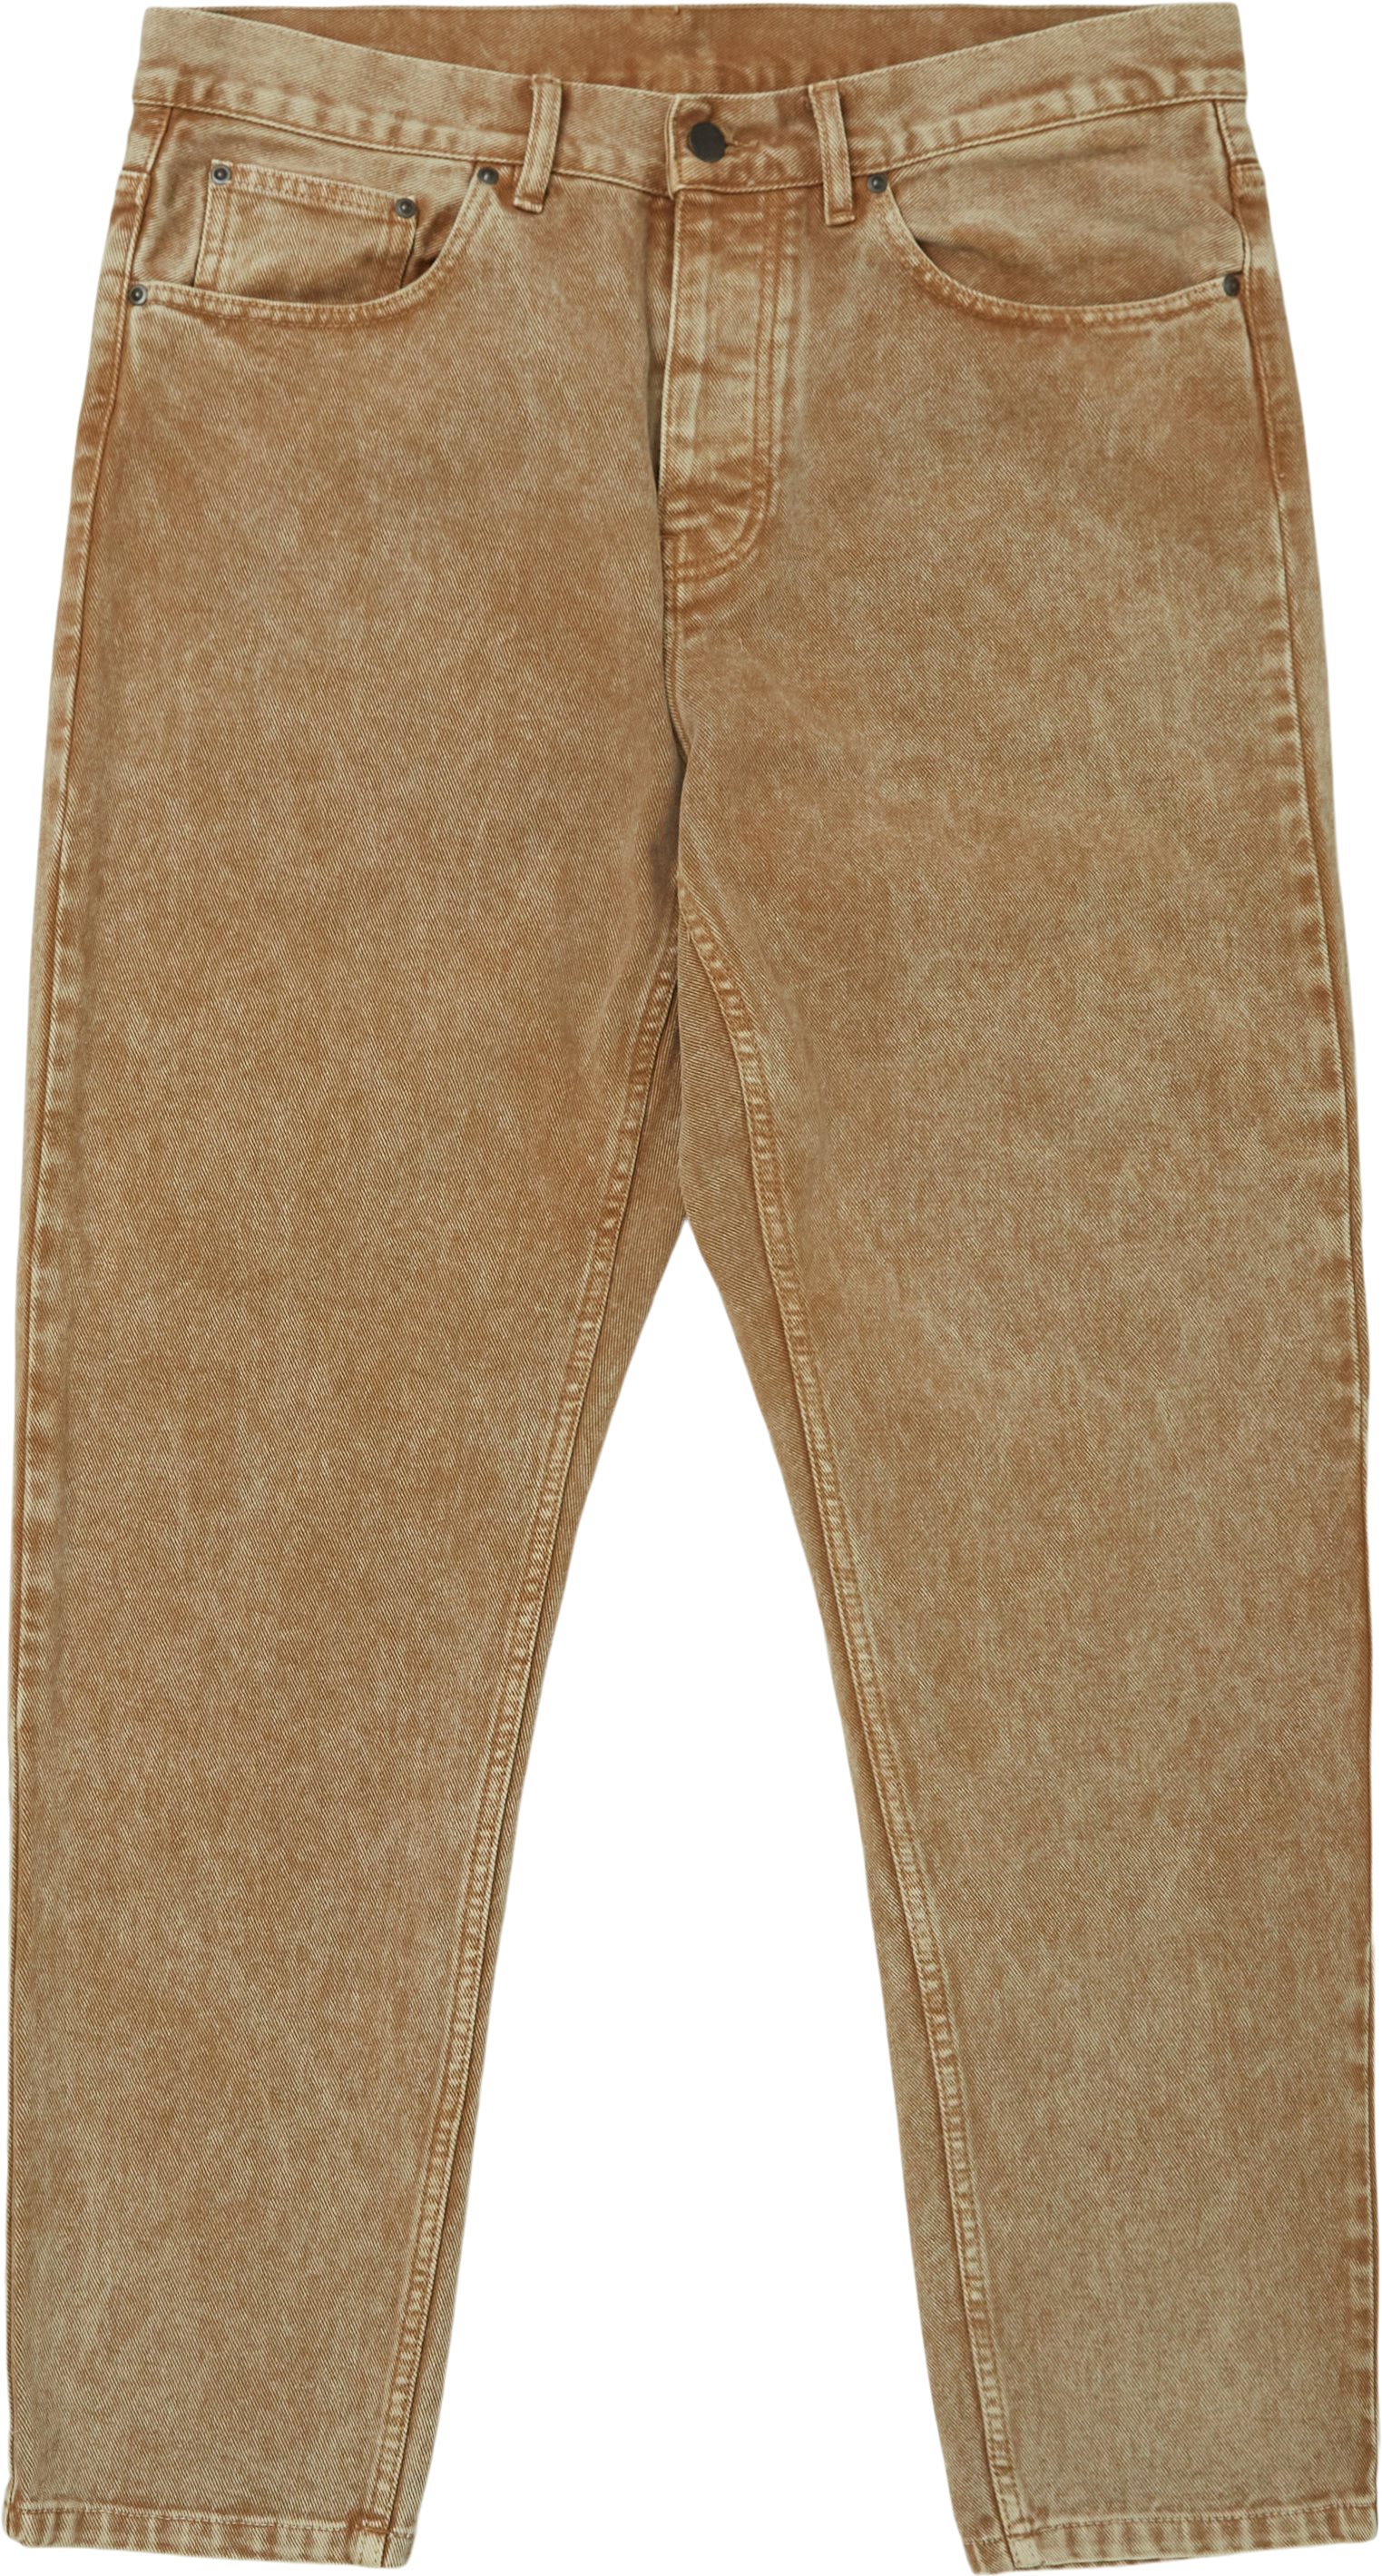 Newel Pant I029148 - Jeans - Relaxed fit - Brown